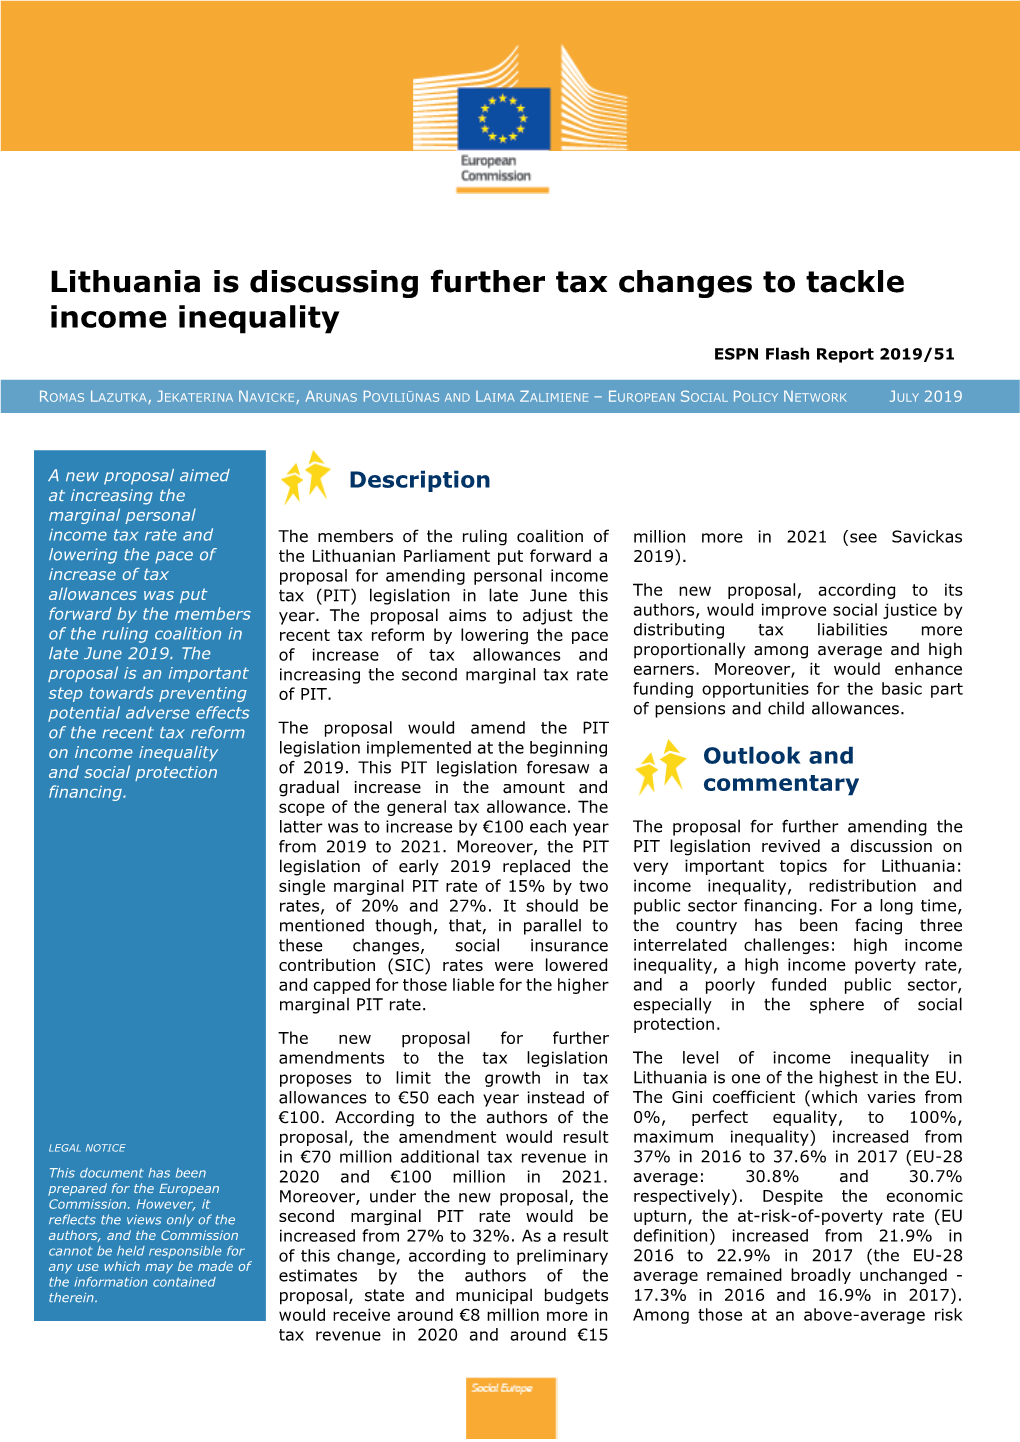 Lithuania Is Discussing Further Tax Changes to Tackle Income Inequality ESPN Flash Report 2019/51